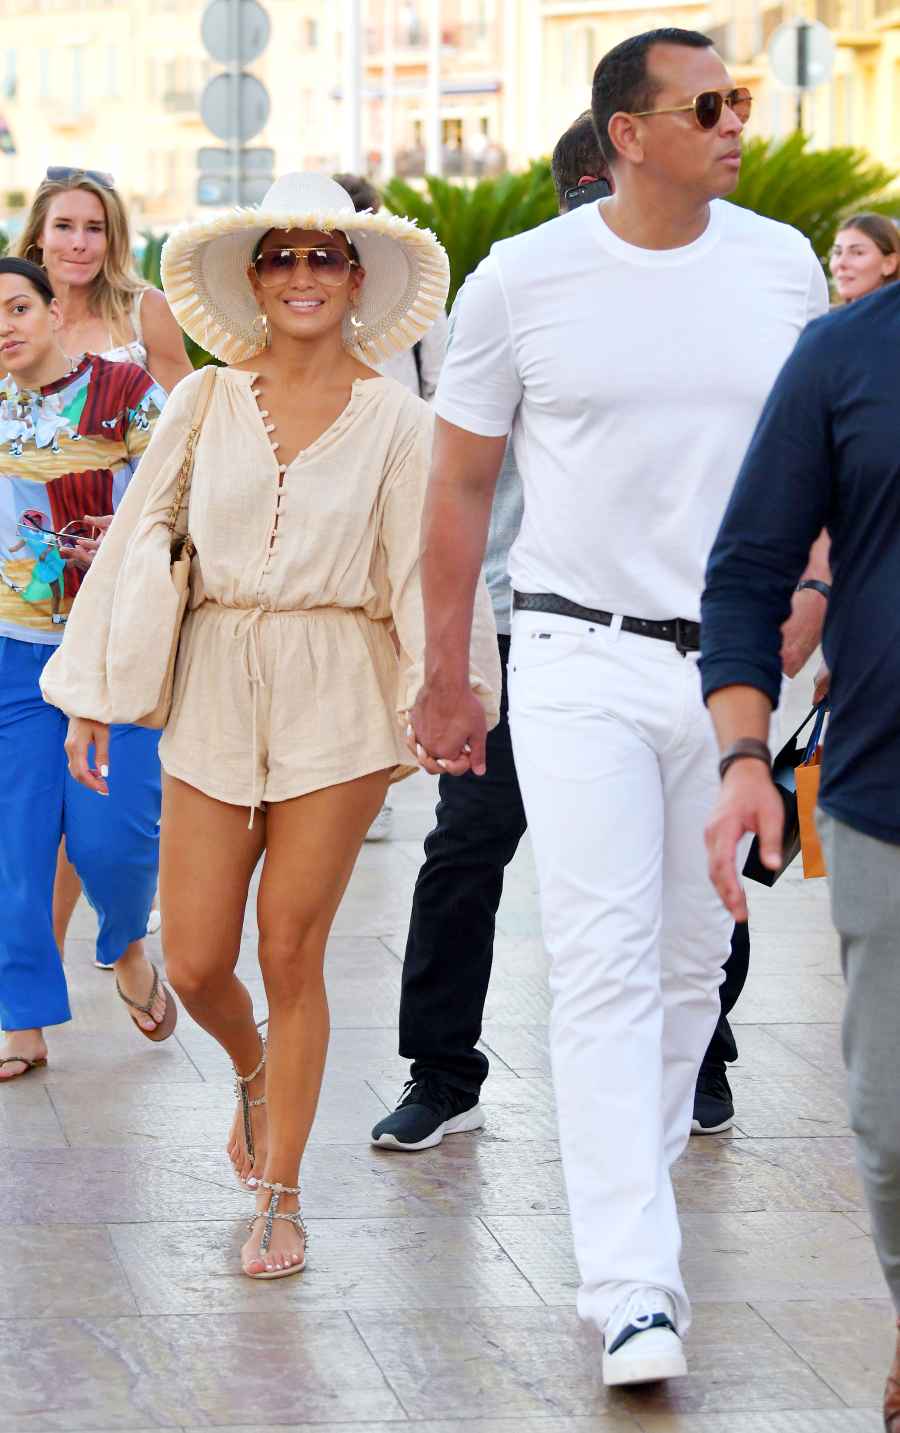 Jennifer Lopez Alex Rodriguez plans to wed are on the back burner due to their busy schedules